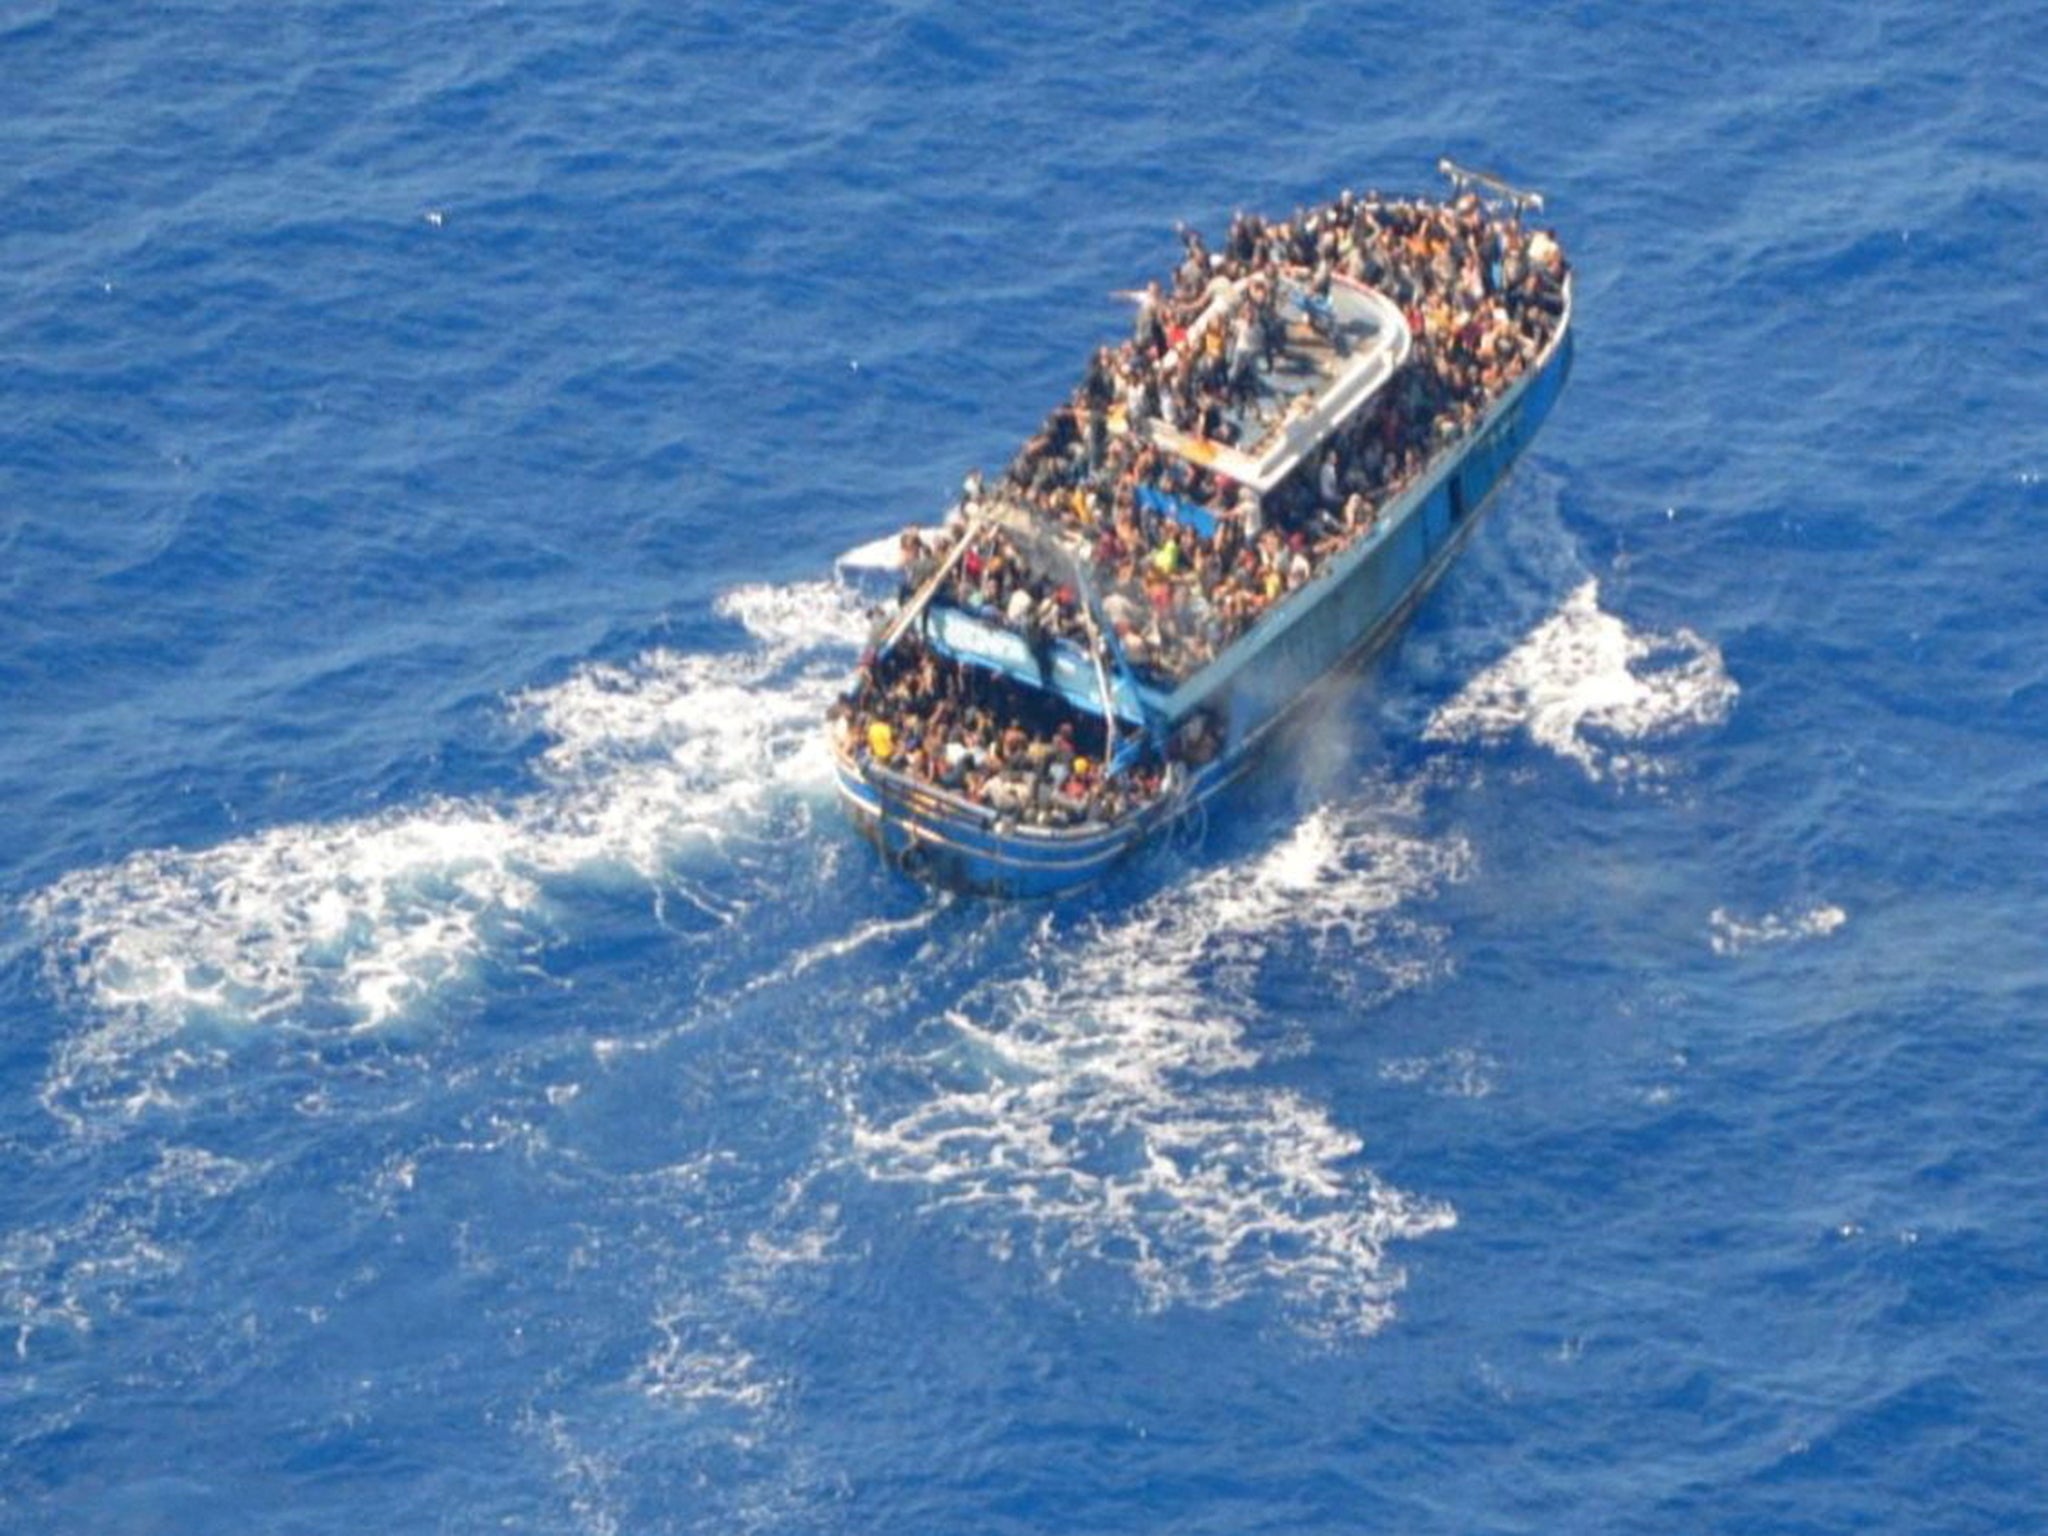 A photograph captured by the European Border and Coast Guard Agency (Frontex) shows a boat carrying hundreds of migrants shortly before it sank